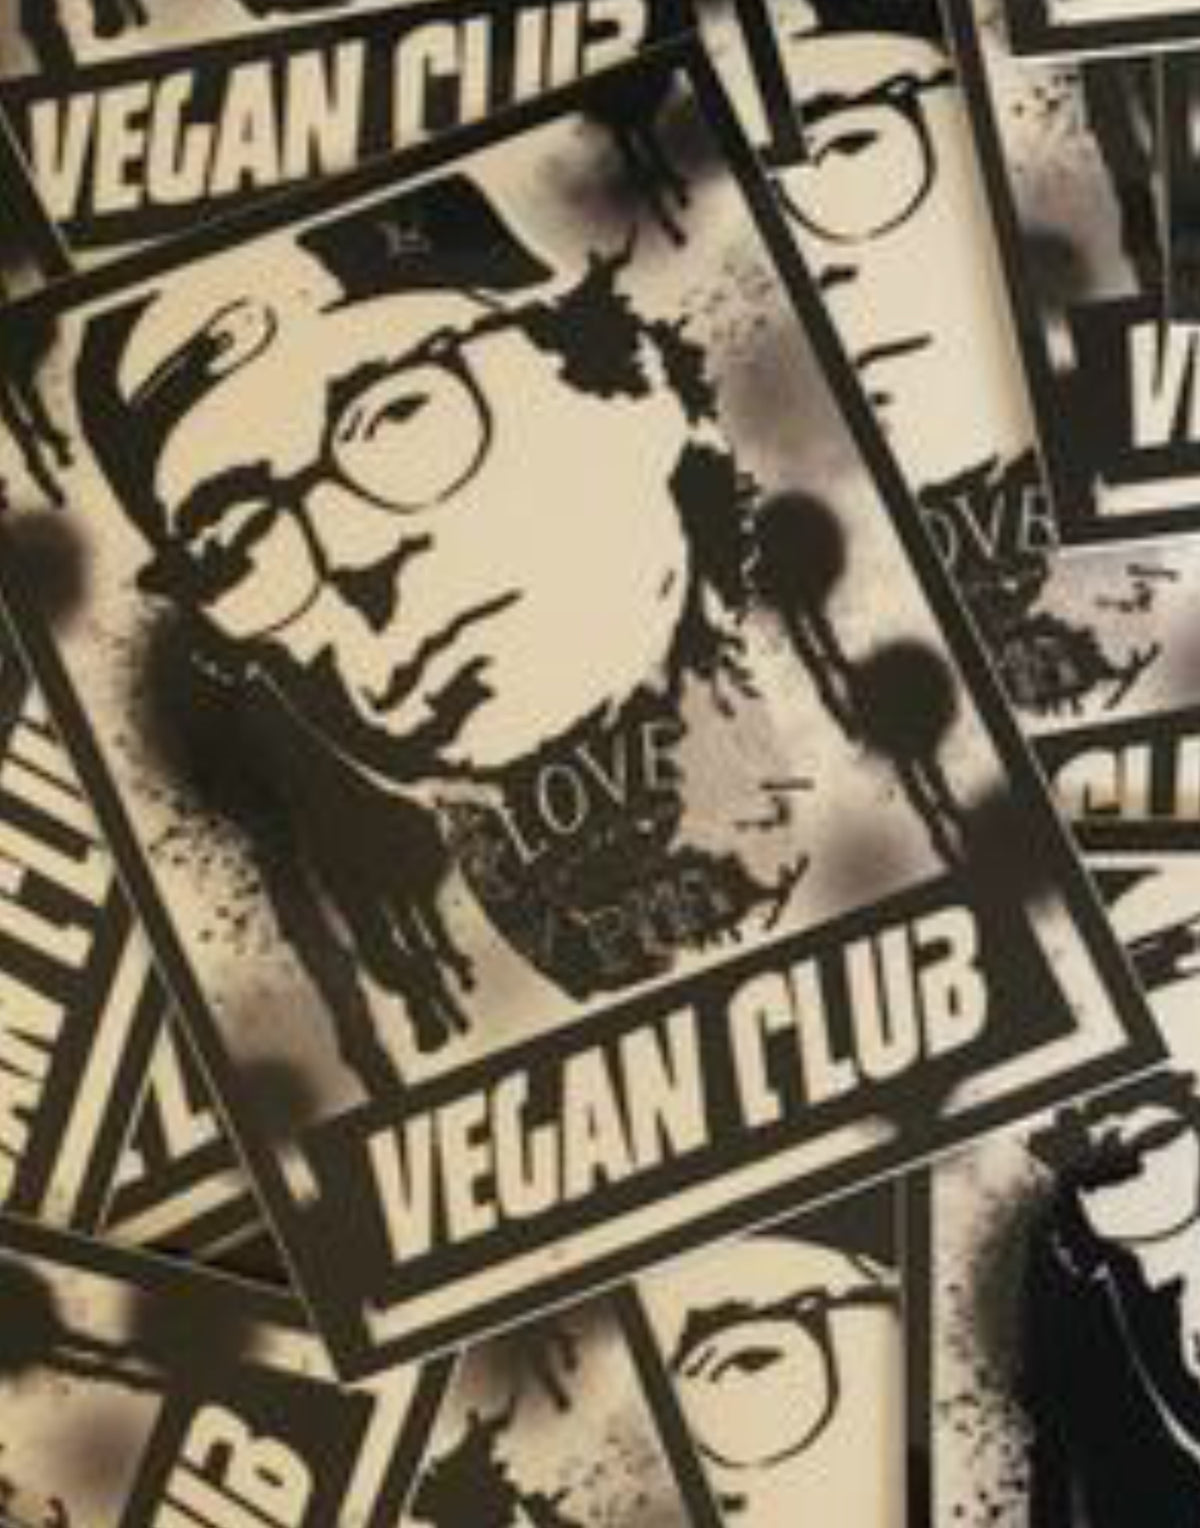 SOLD OUT - 12 Vegan Club Toby Morse of h20 Stickers - Collab with Anthony Proetta Jr